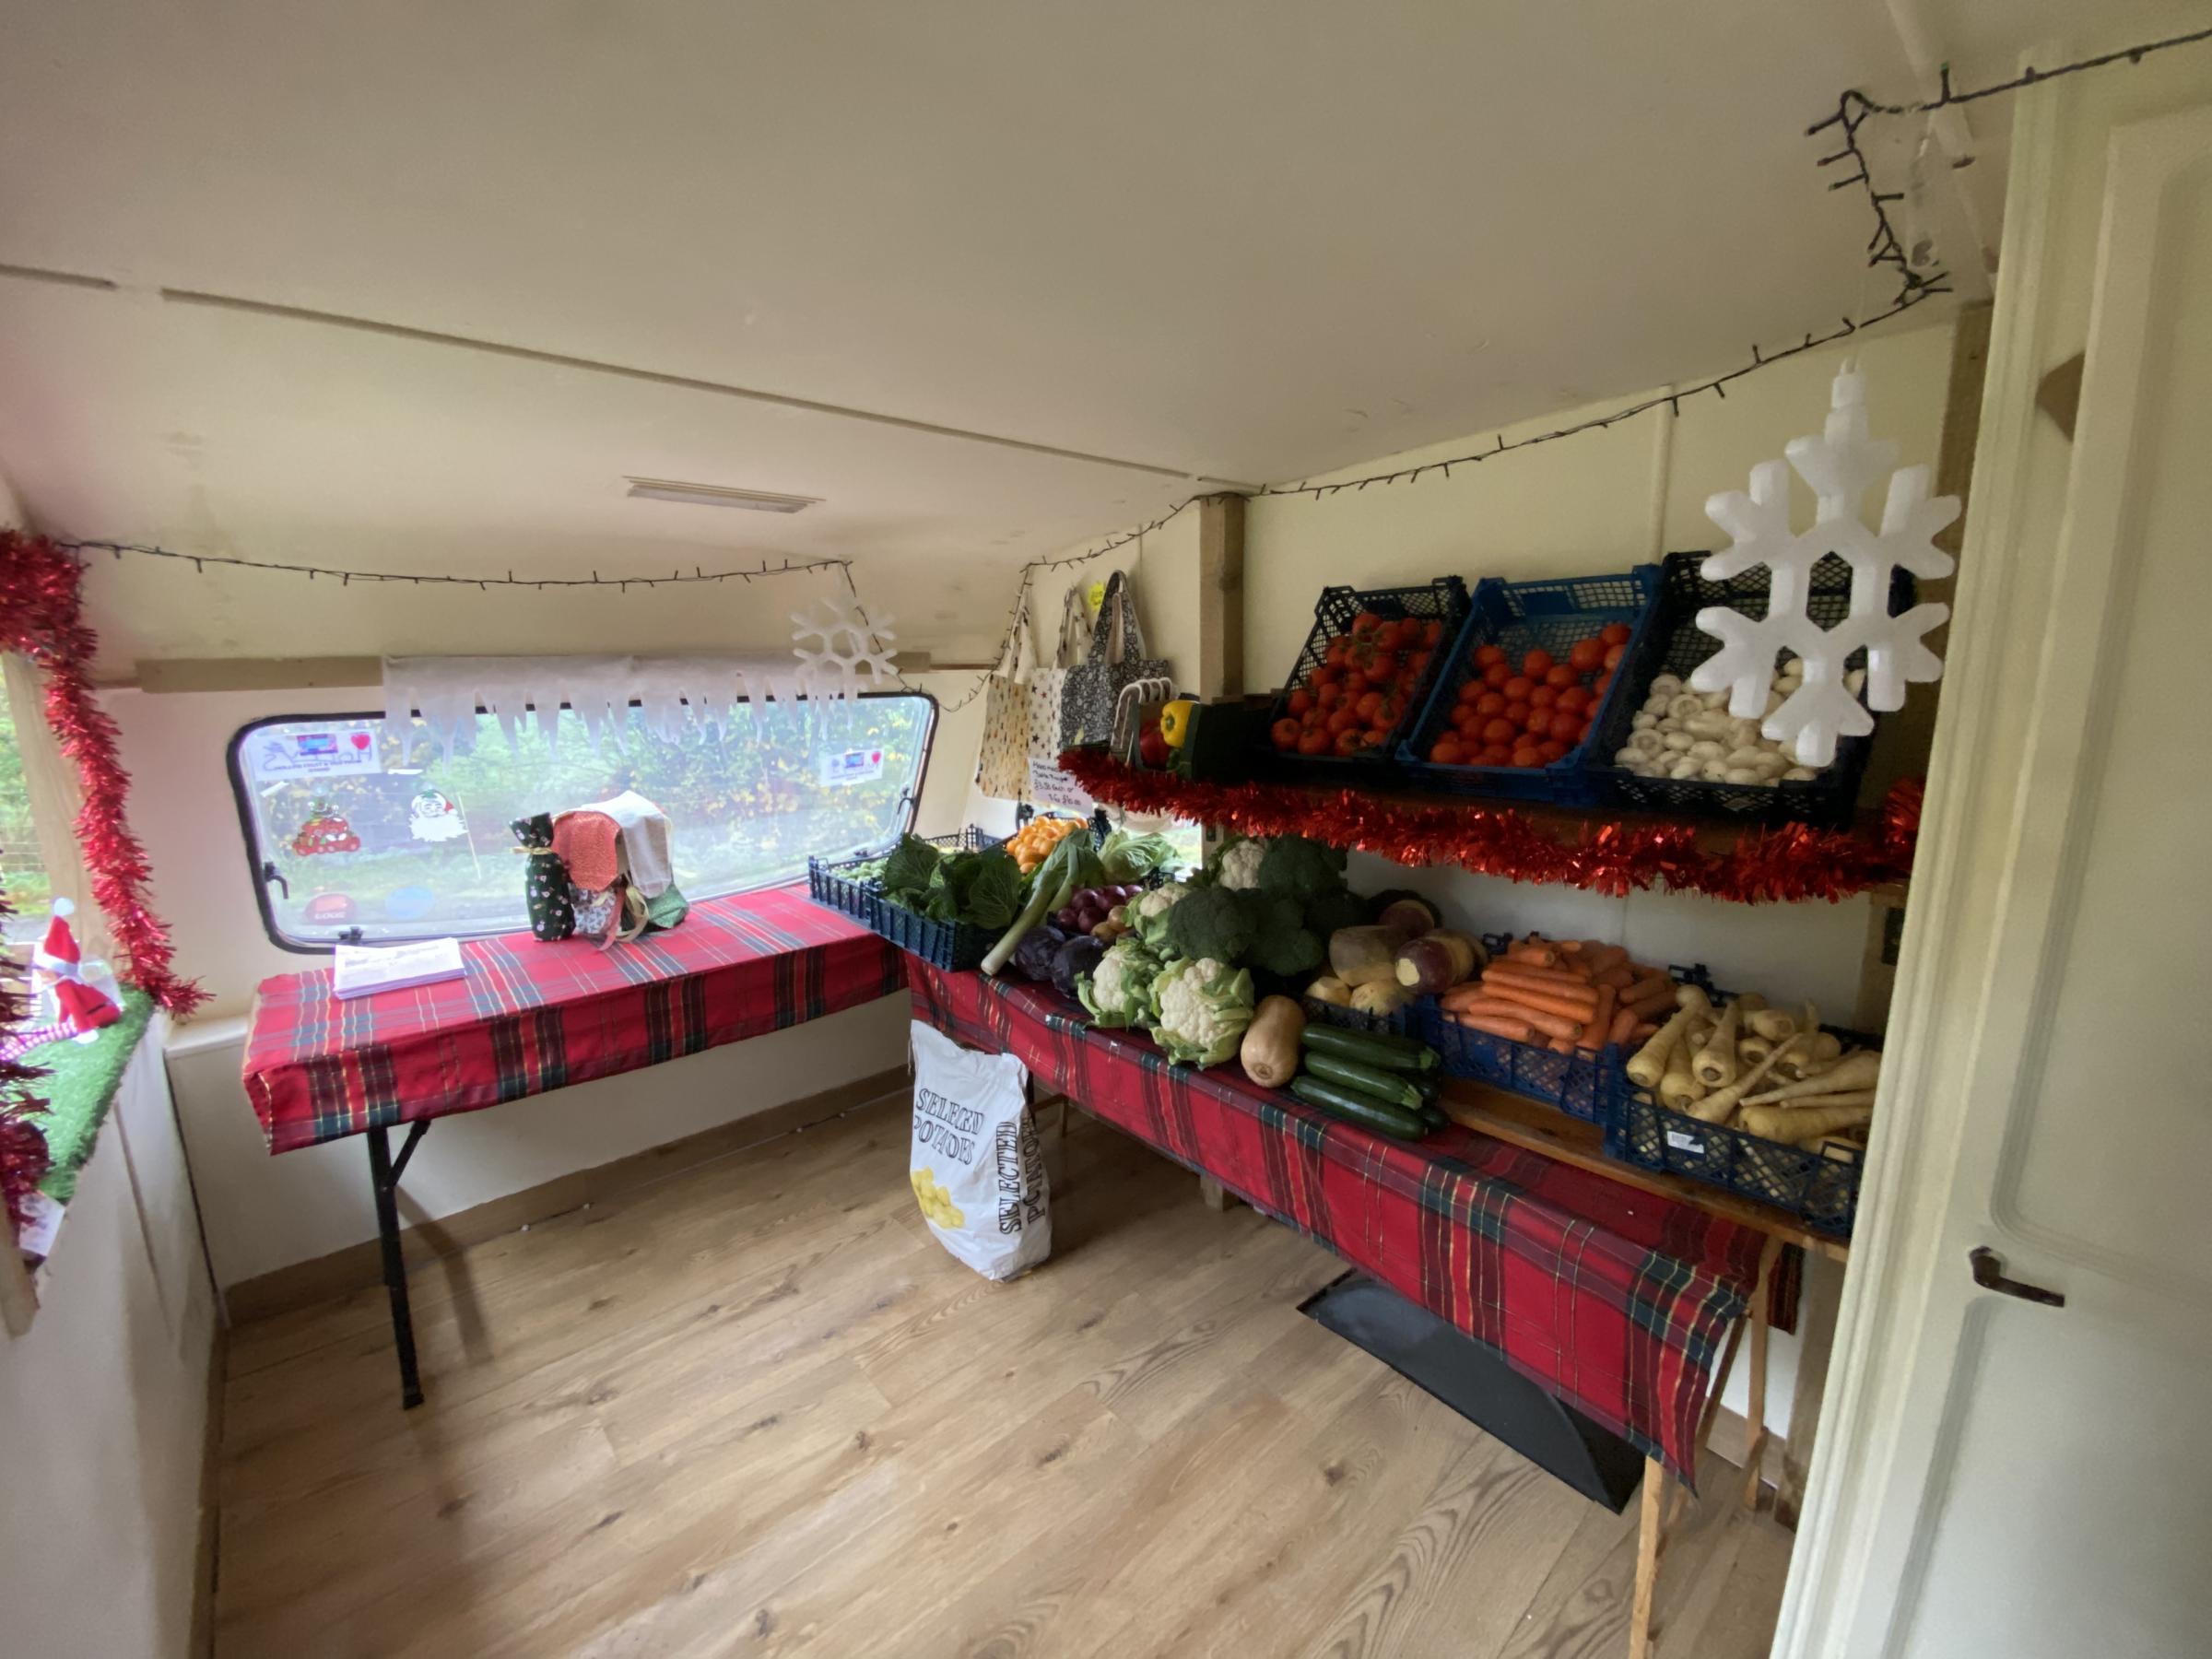 Hollys fruit and veg stand